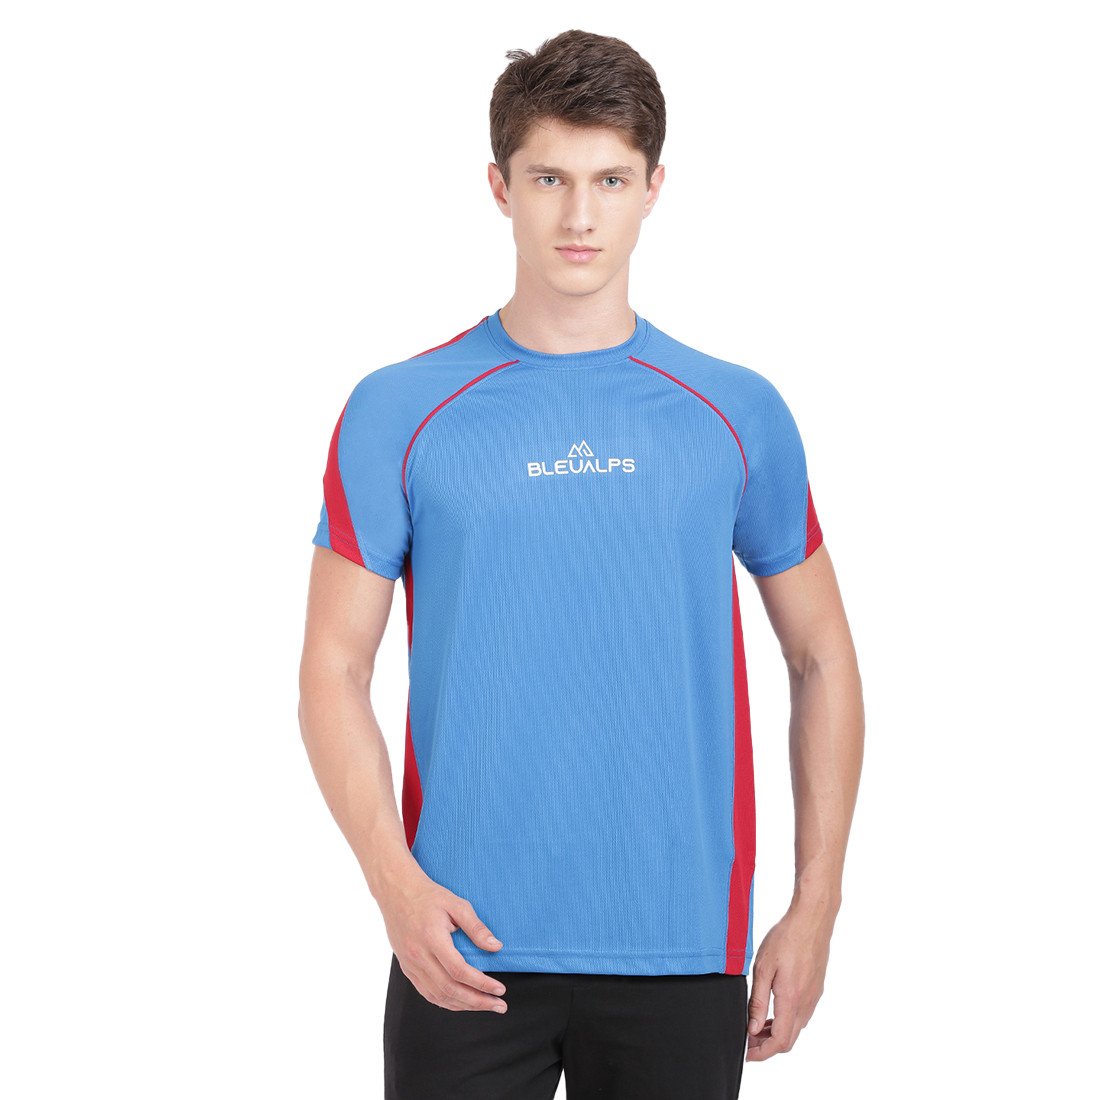 Bleualps Stylish Attractive Activewear Sports Round neck Half Sleeve T-Shirt For Men | Sports T-Shirt | Workout T-Shirt